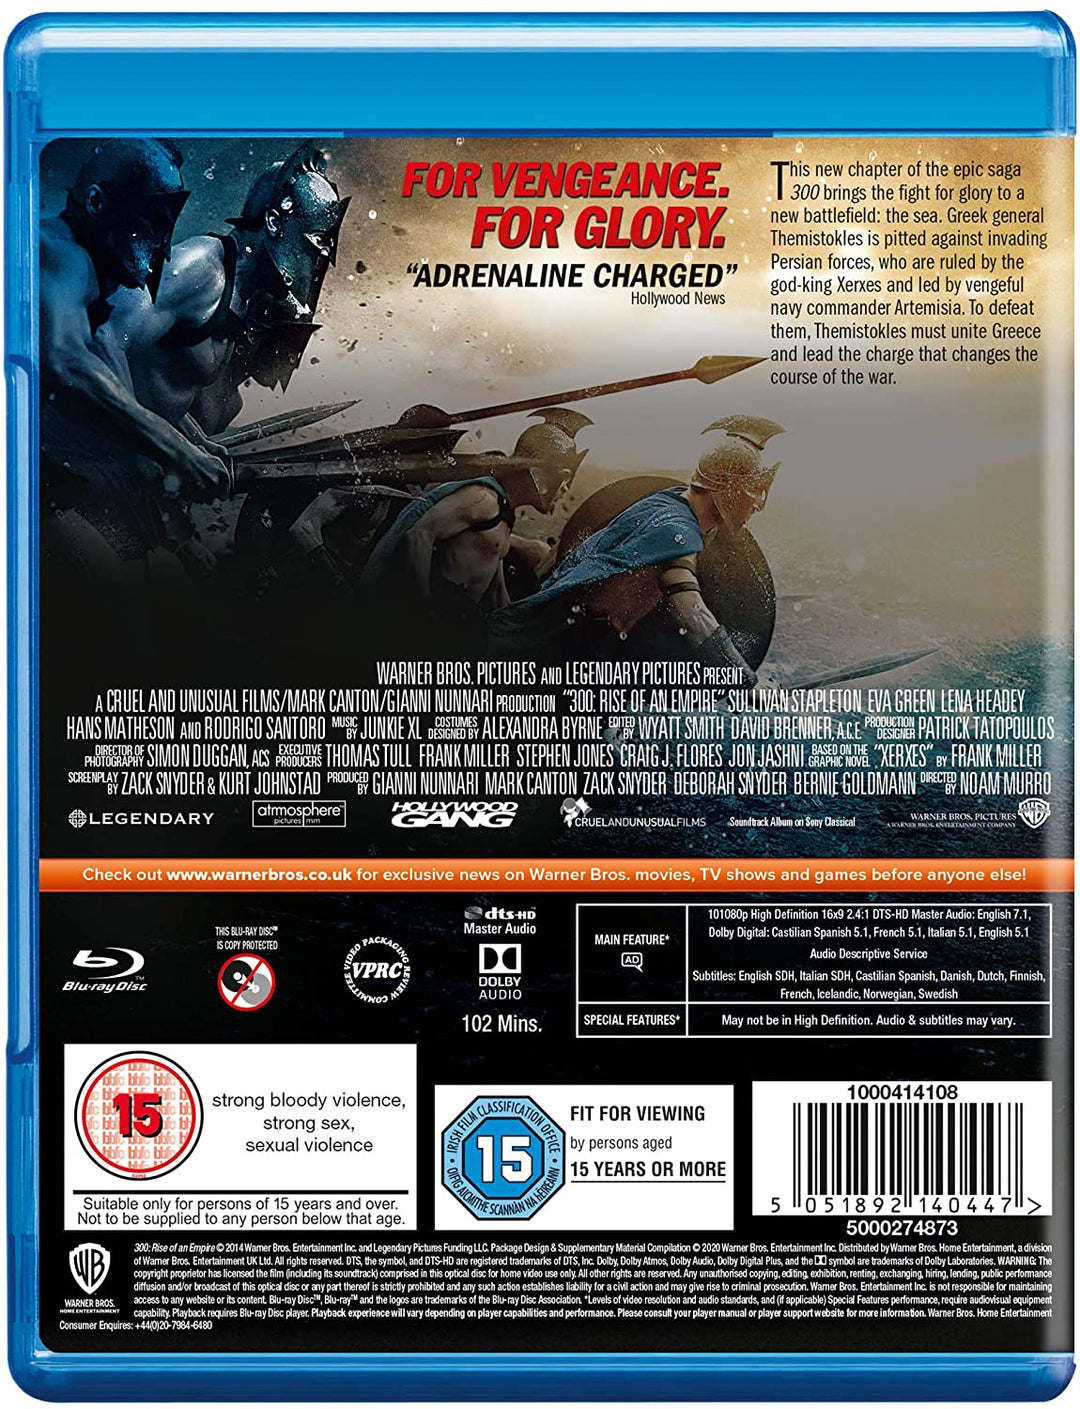 300: Rise Of An Empire [2013] [2014] [Region Free] - Action/War [Blu-Ray]